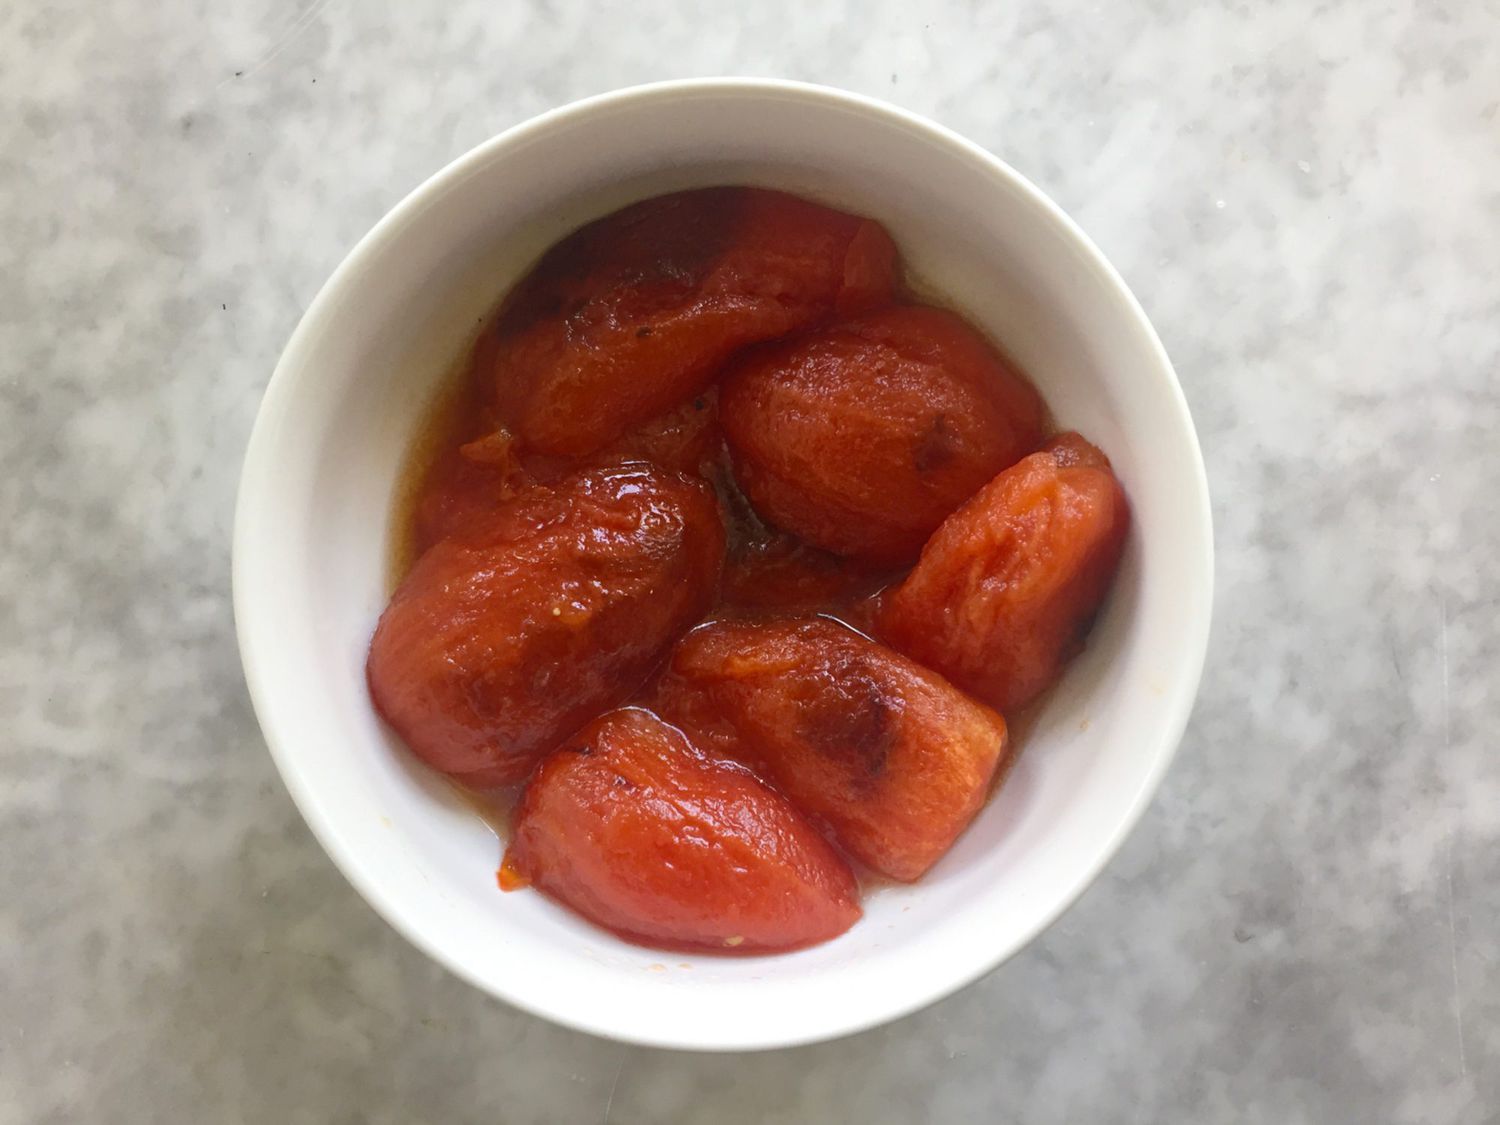 Fire-roasted tomatoes without skins in bowls.